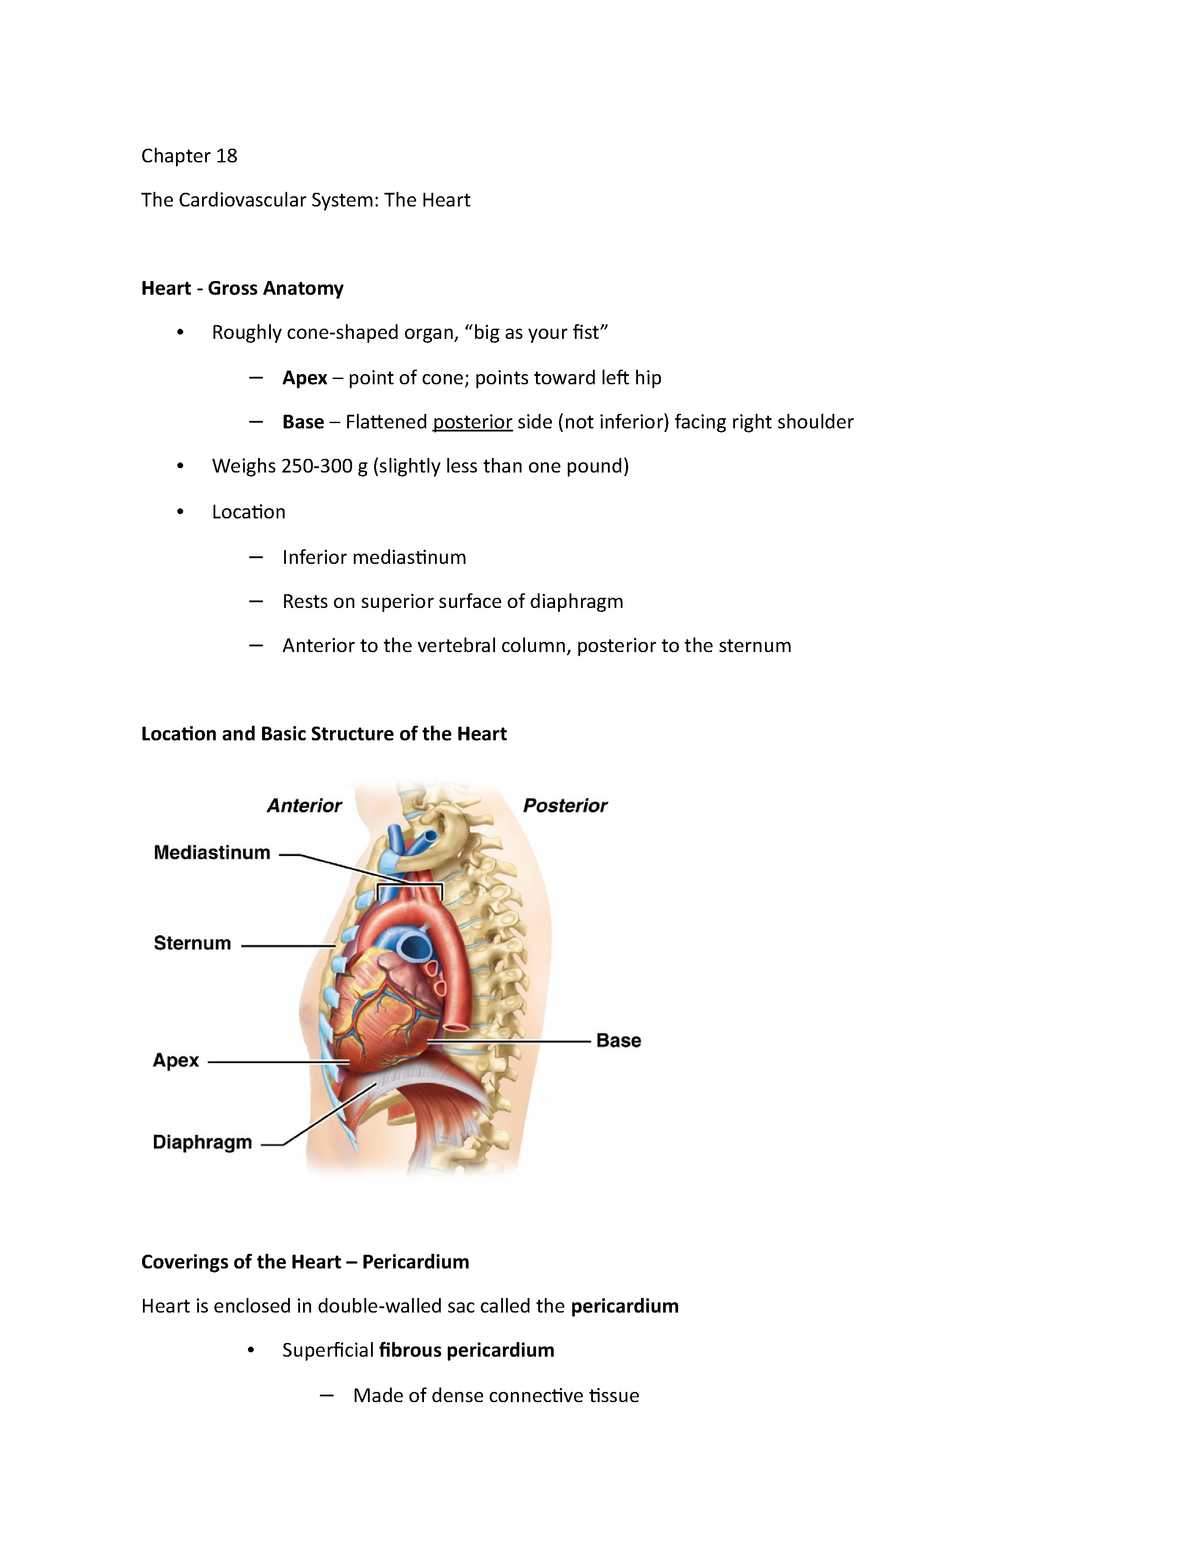 7-chapter-18-the-cardiovascular-system-the-heart-packet-answers-romeylilyana